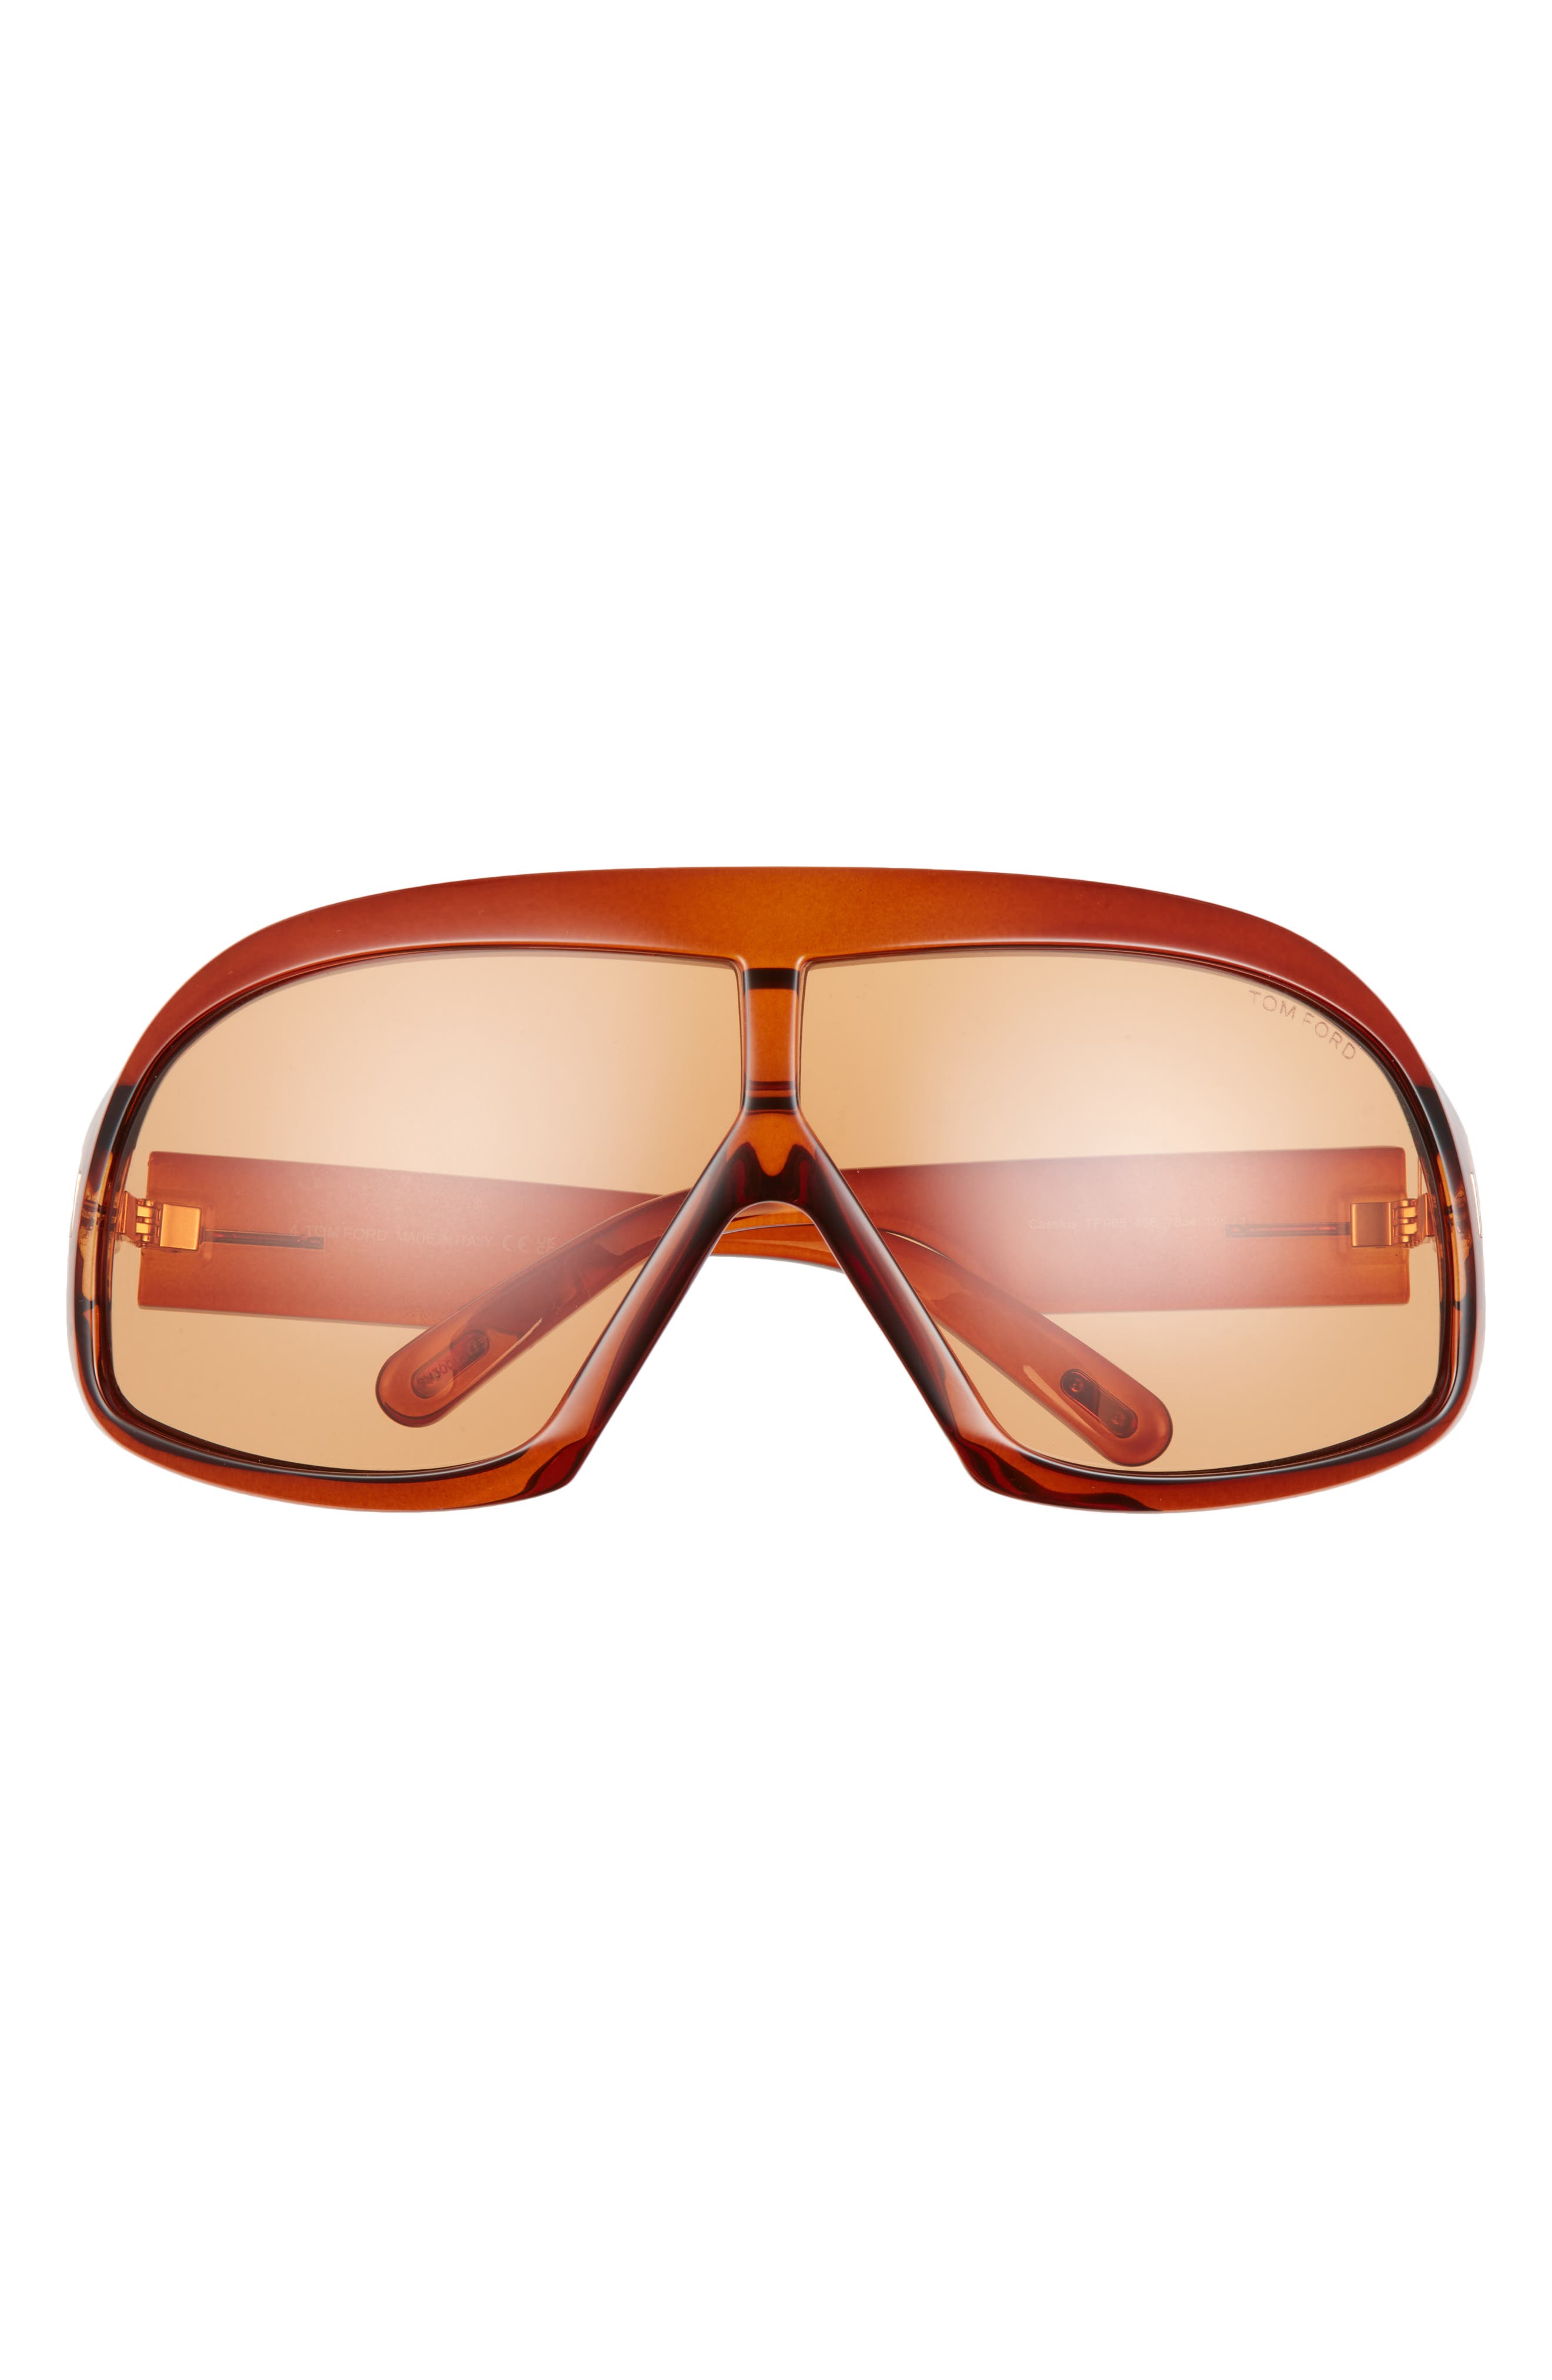 Tom Ford 78mm Aviator Sunglasses in Ilght Bronw/Brown at Nordstrom